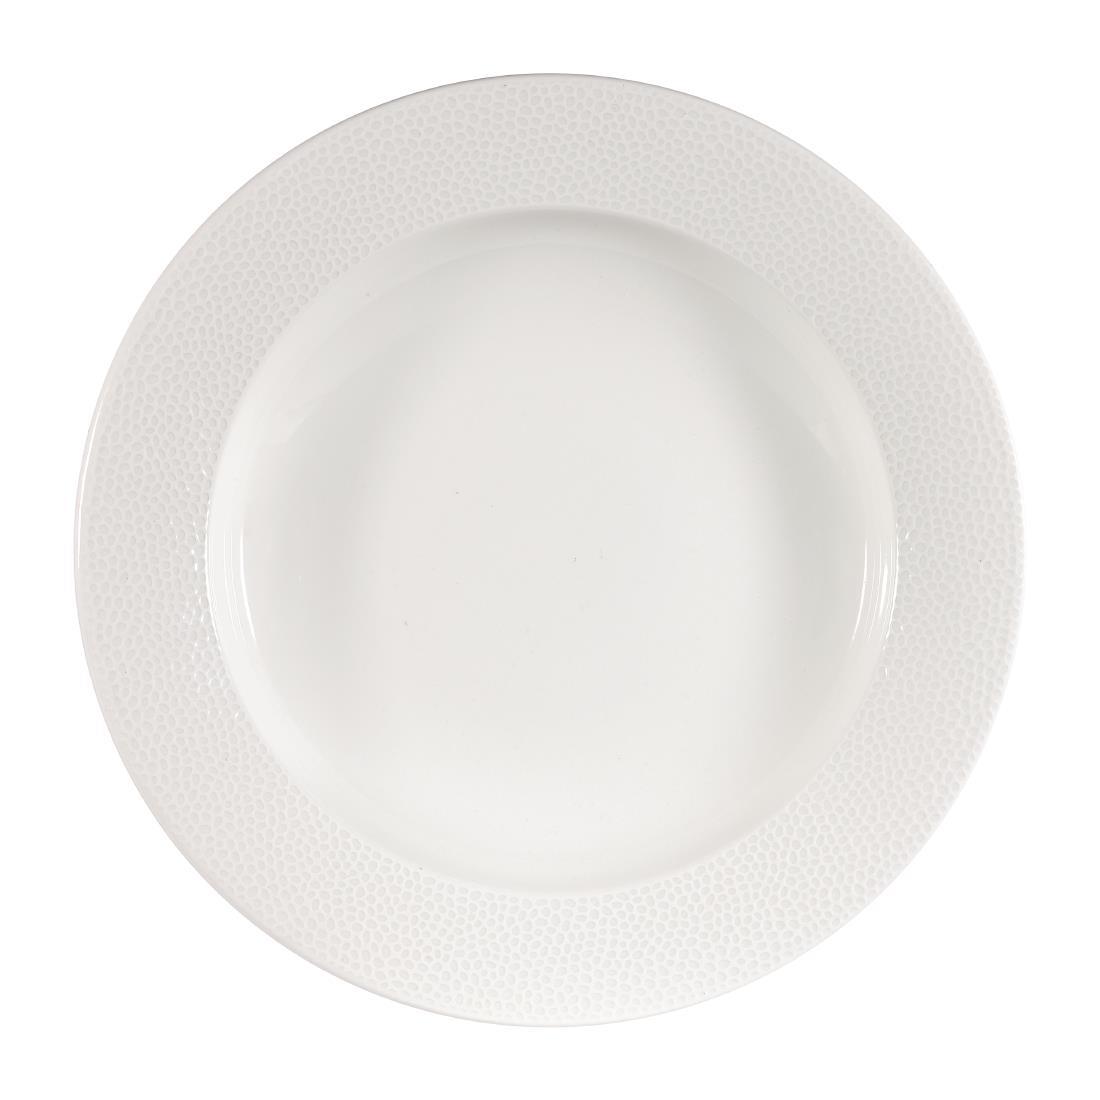 Churchill Isla Wide Rim Plate White 305mm (Pack of 12) - DY831  - 1